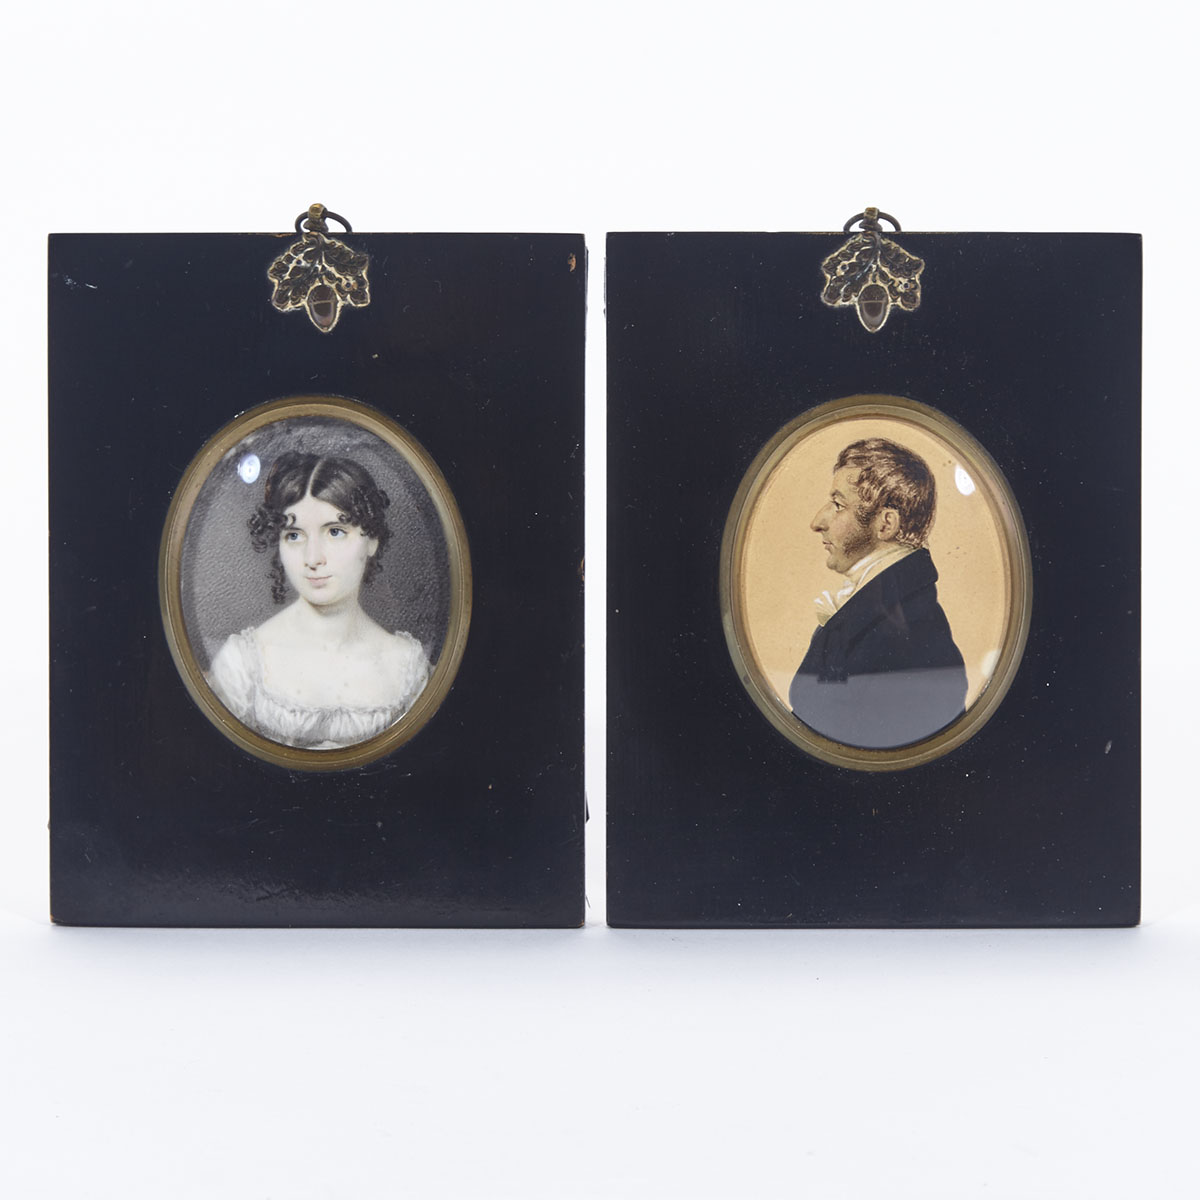 Associated Pair of Canadian School Portrait Miniatures of Pierre-Jean de Sales Laterrière and His Wife Mary Anne Bulmer, early 19th century